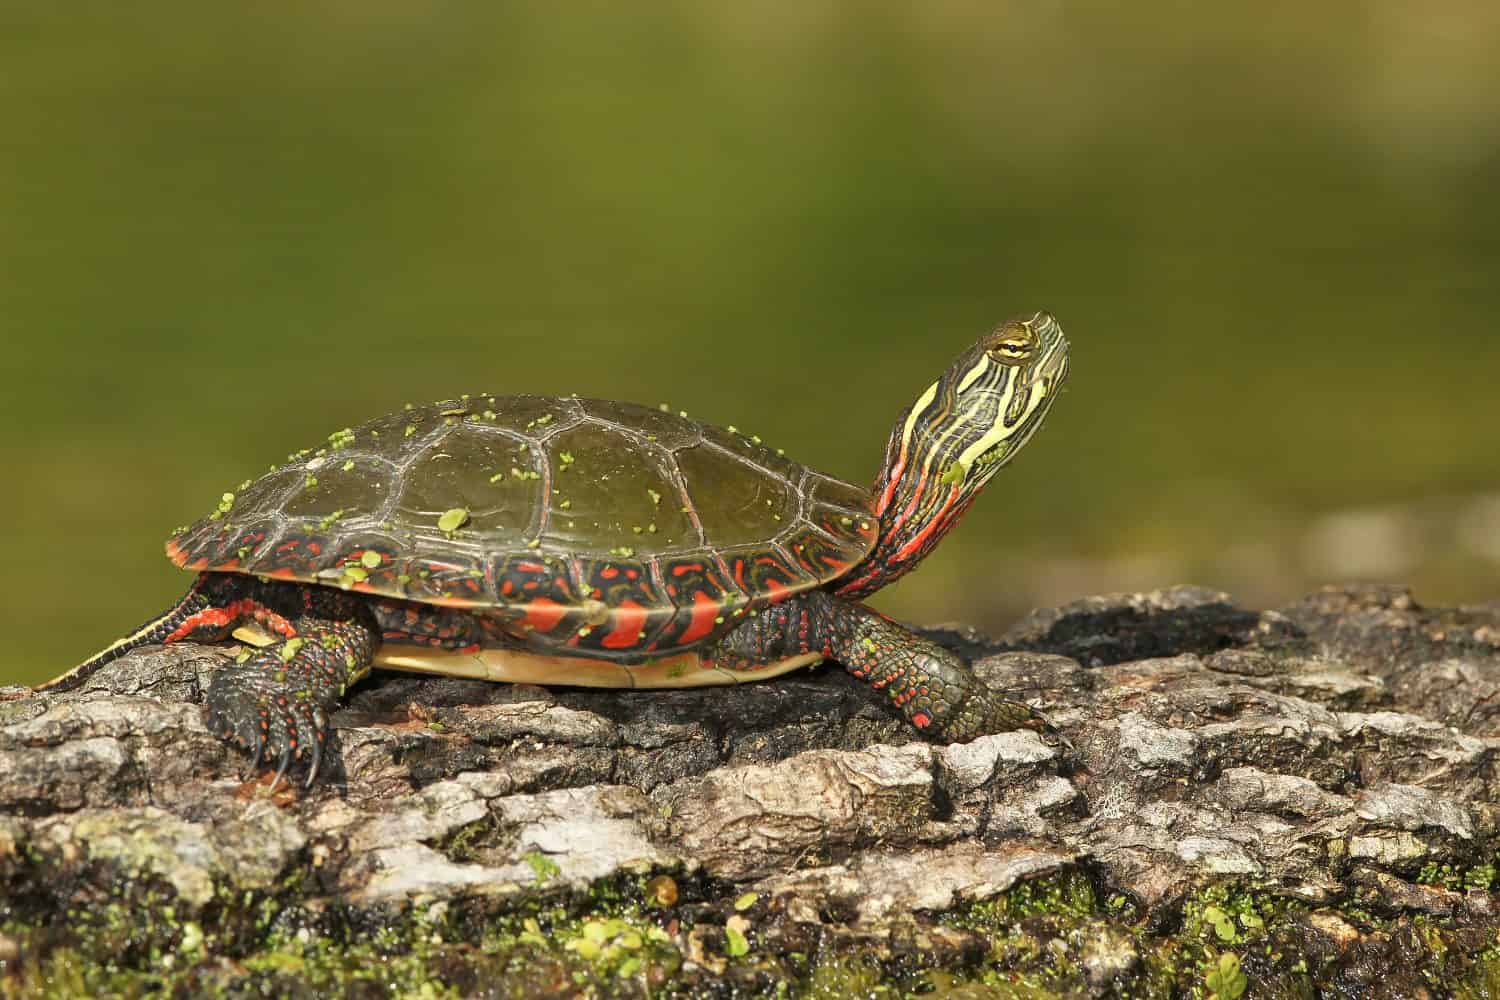 Midland Painted Turtle (Chrysemys picta marginata) Basking on a Log - Old Ausable Channel, Pinery Provincial Park, Ontario, Canada